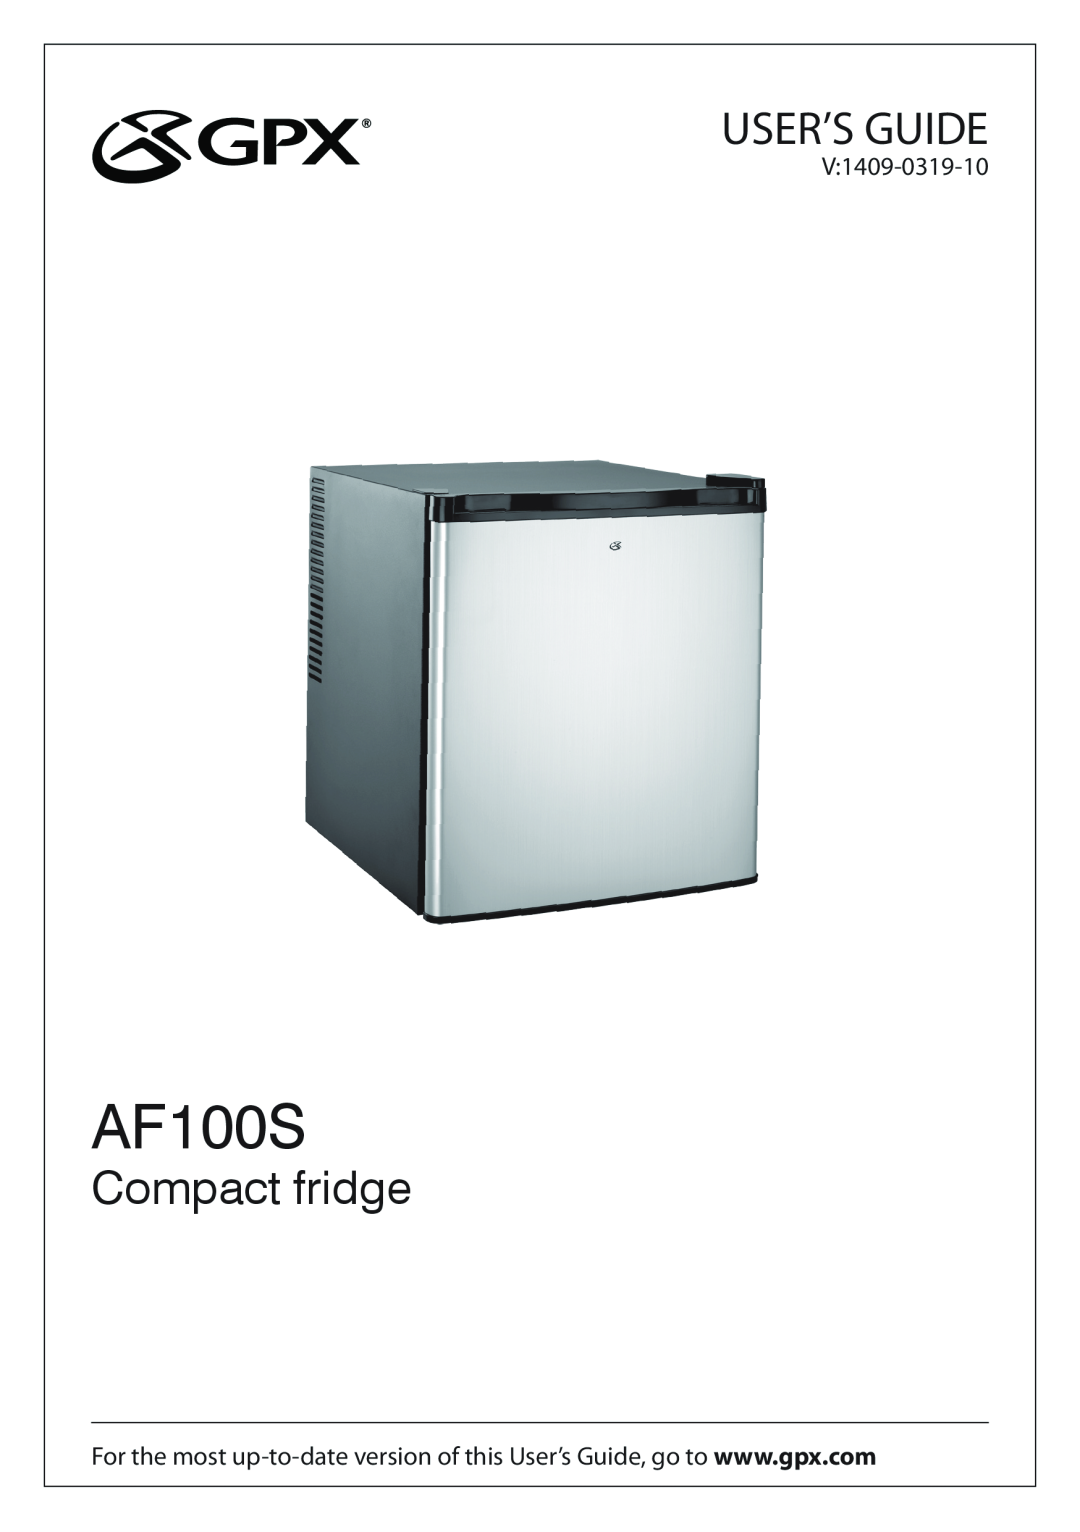 GPX AF100S, 1409-0319-10 manual User’S Guide, Compact fridge 